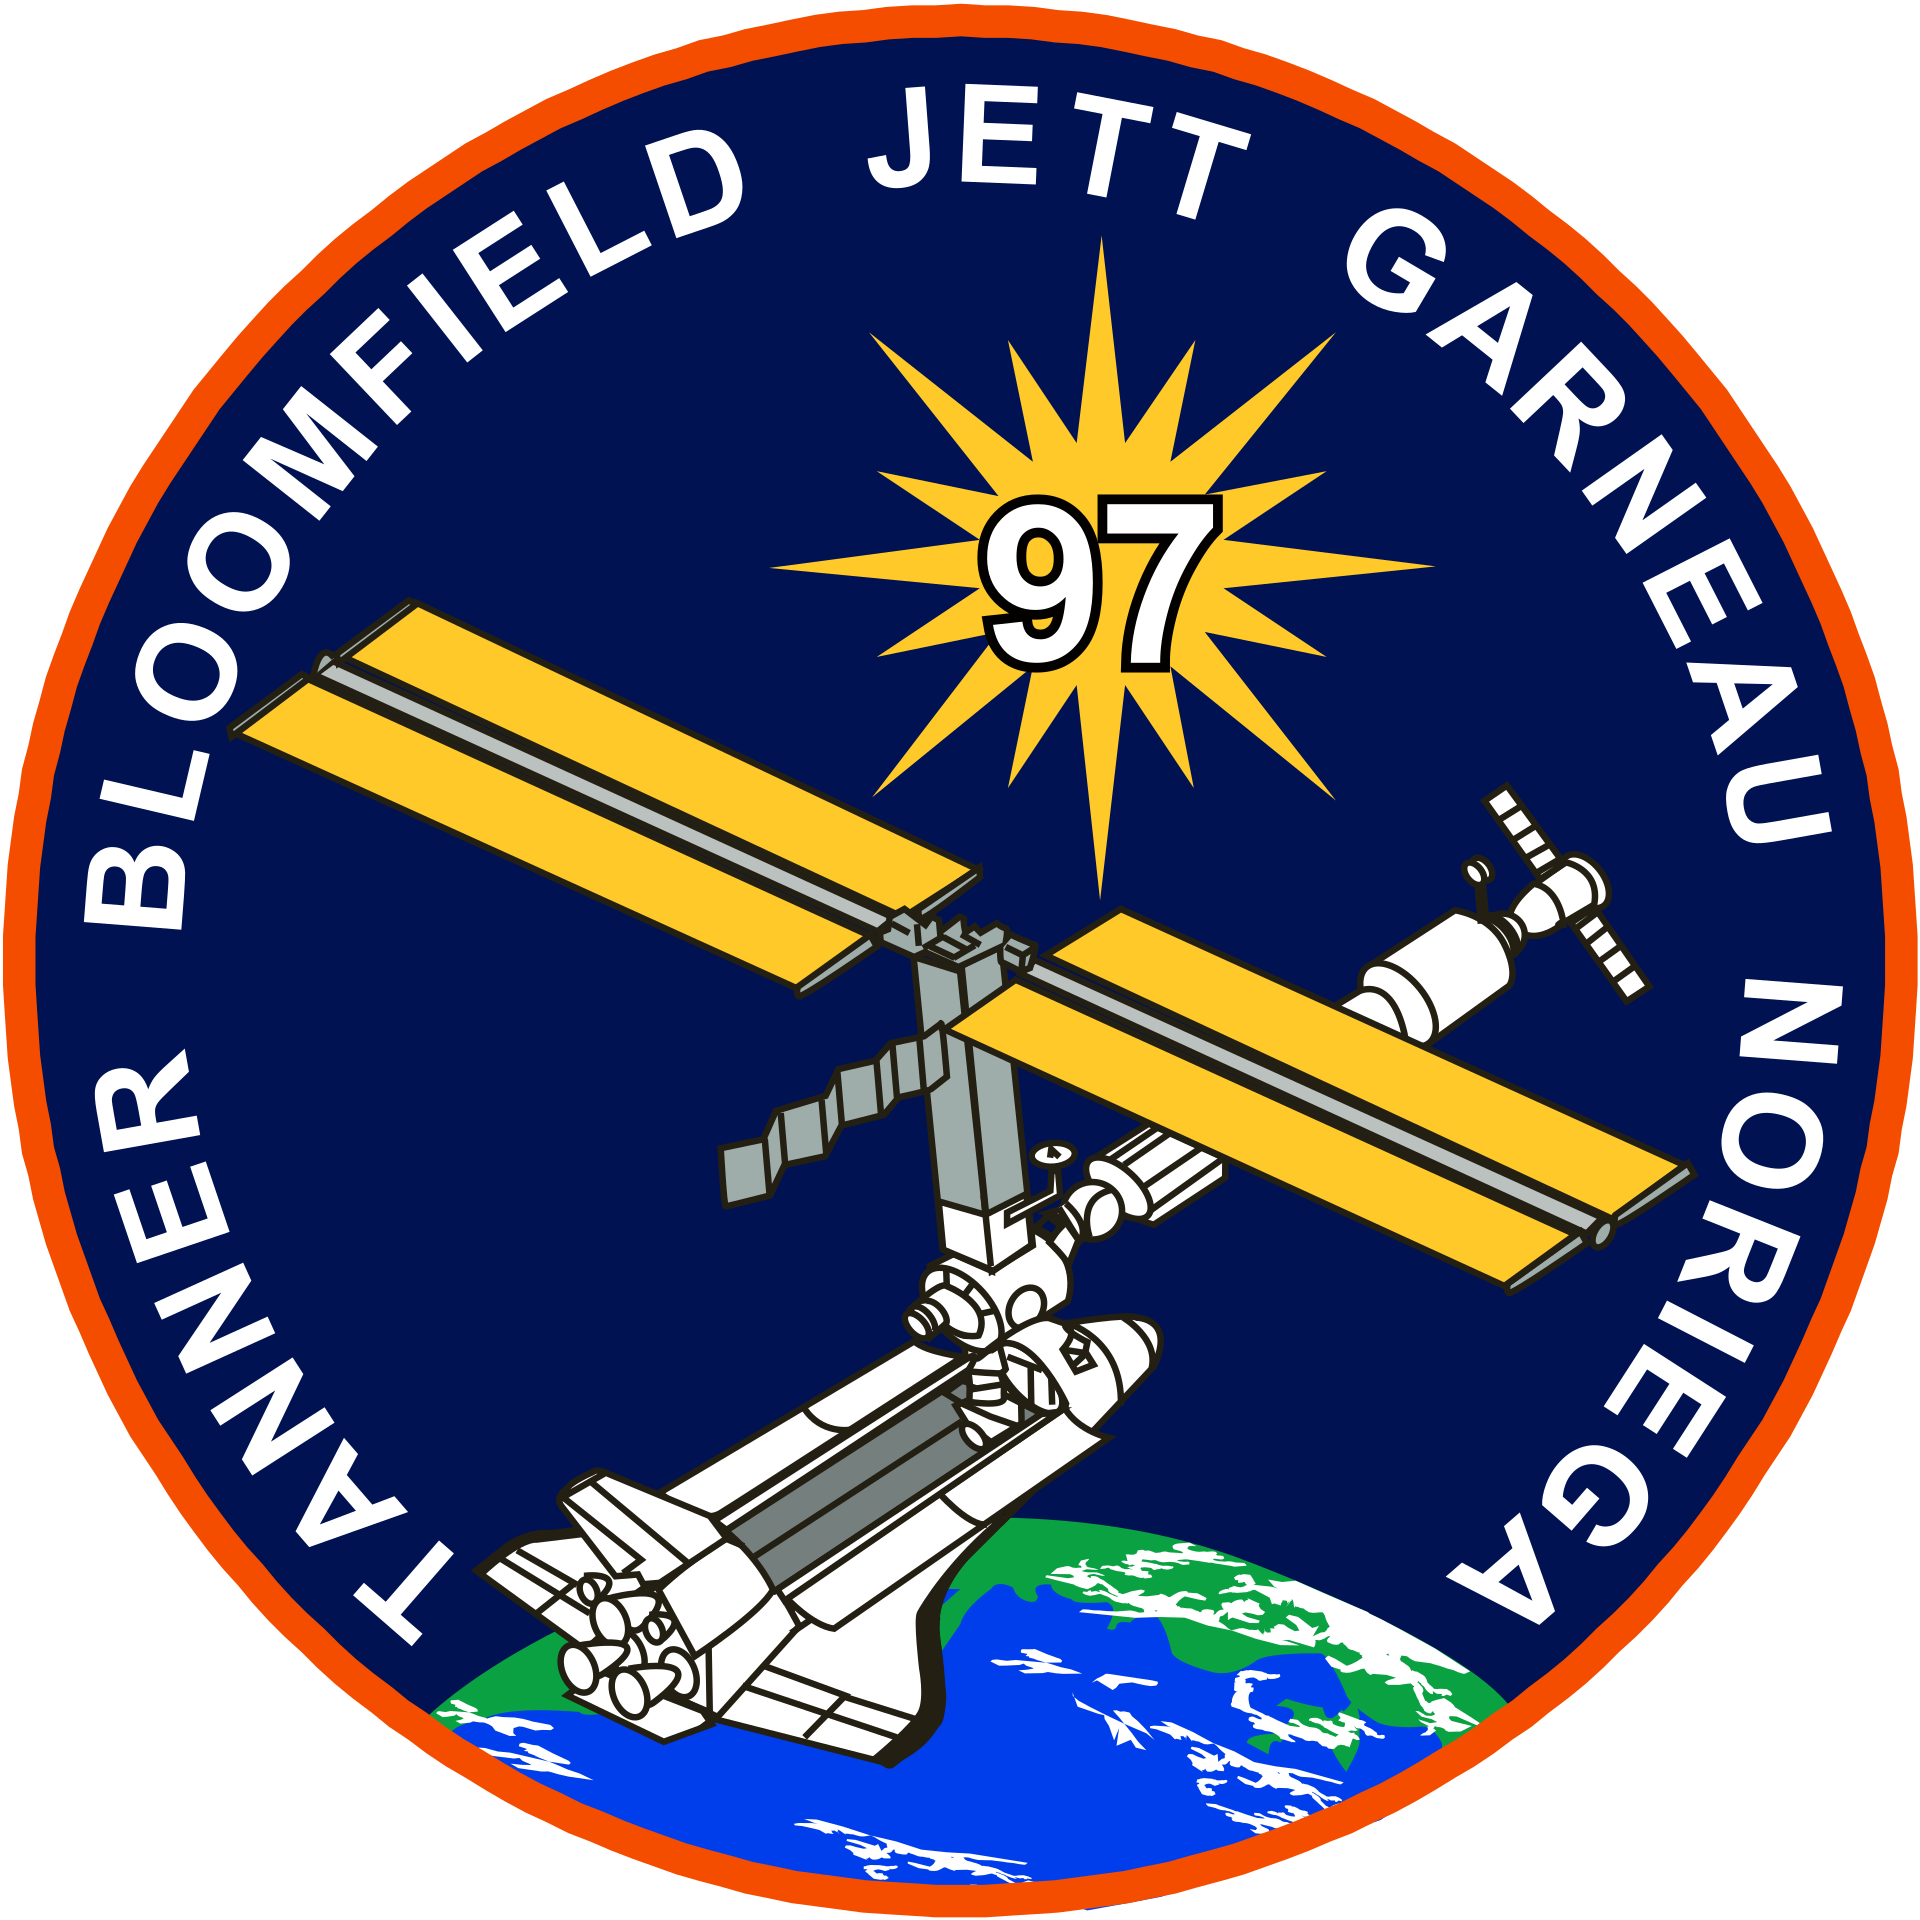 Mission patch for STS-97